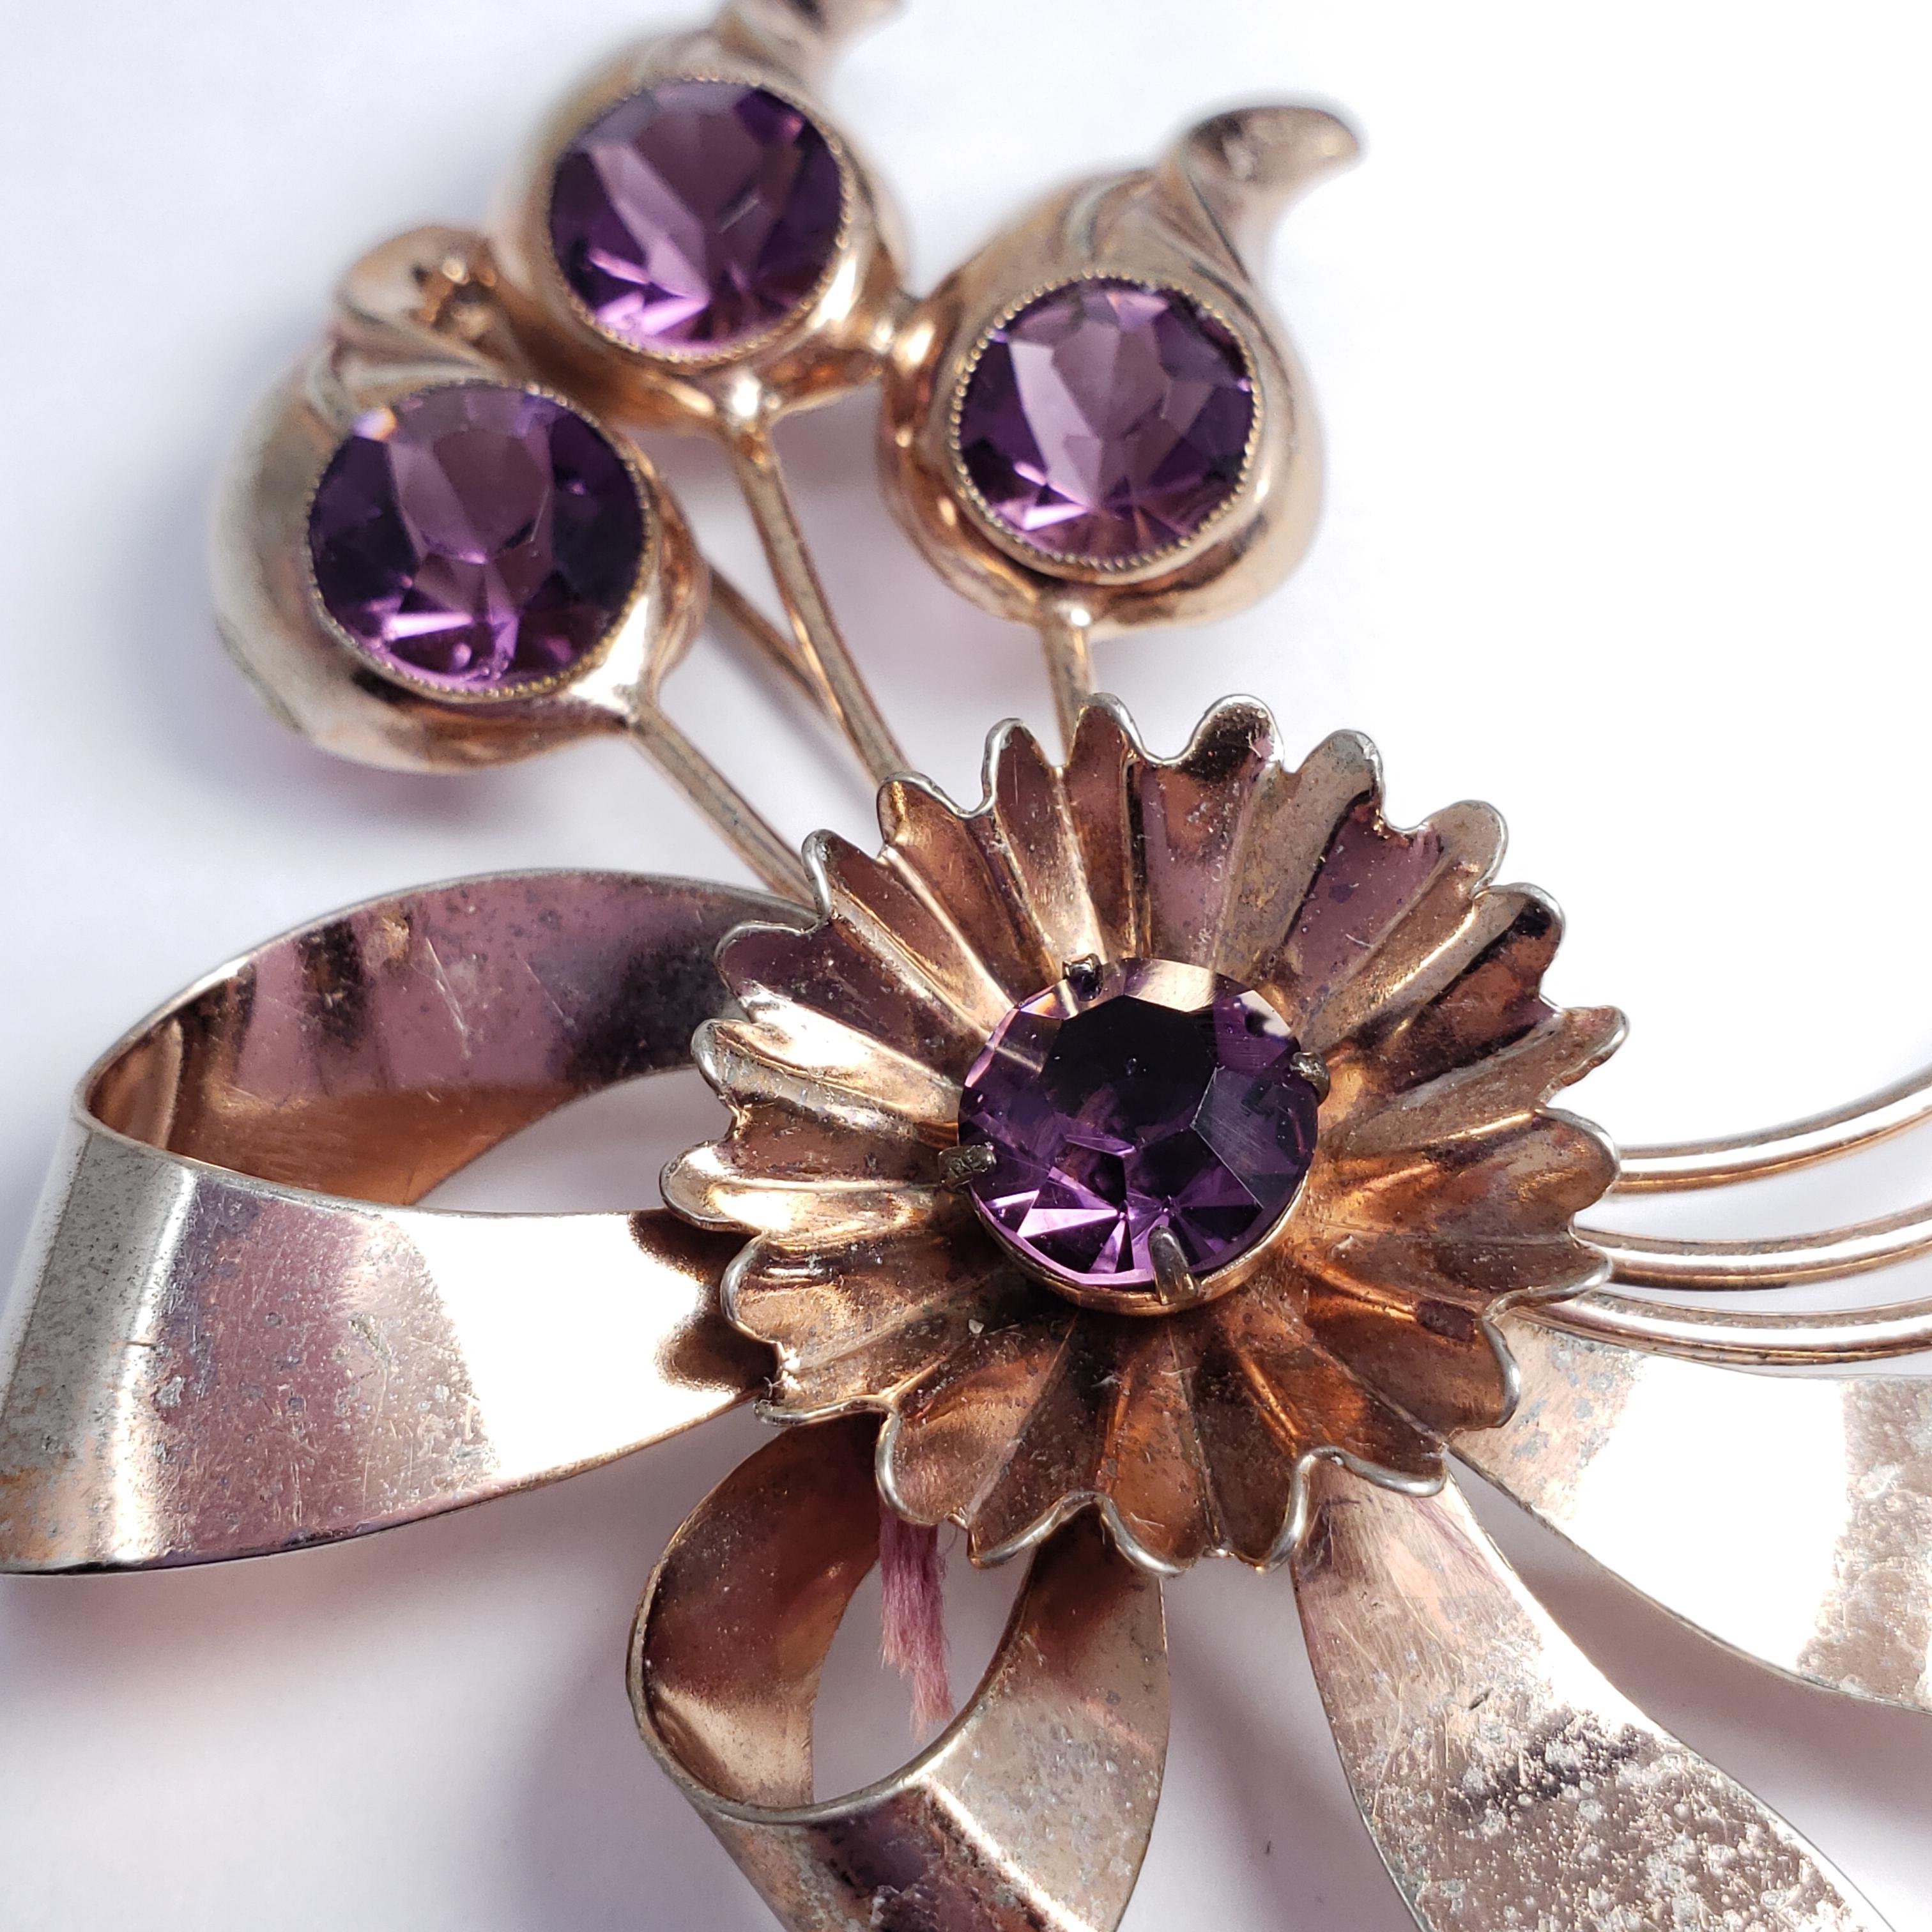 An elegant floral pin brooch! Features an assortment of flowers with amethyst crystal centers. Sterling silver.

Hallmarks: Sterling